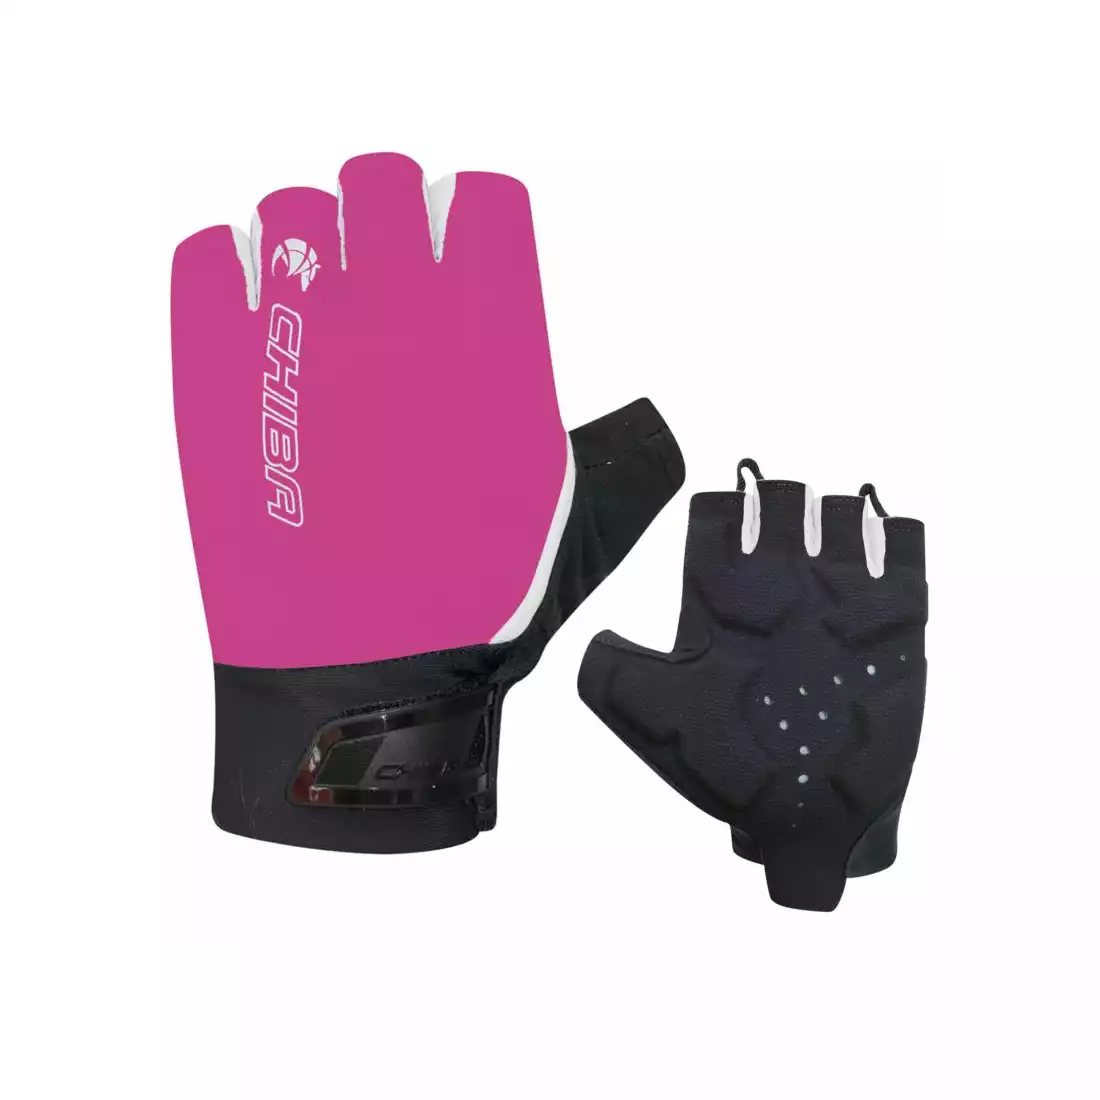 CHIBA LADY SUPERLIGHT Women's cycling gloves, pink